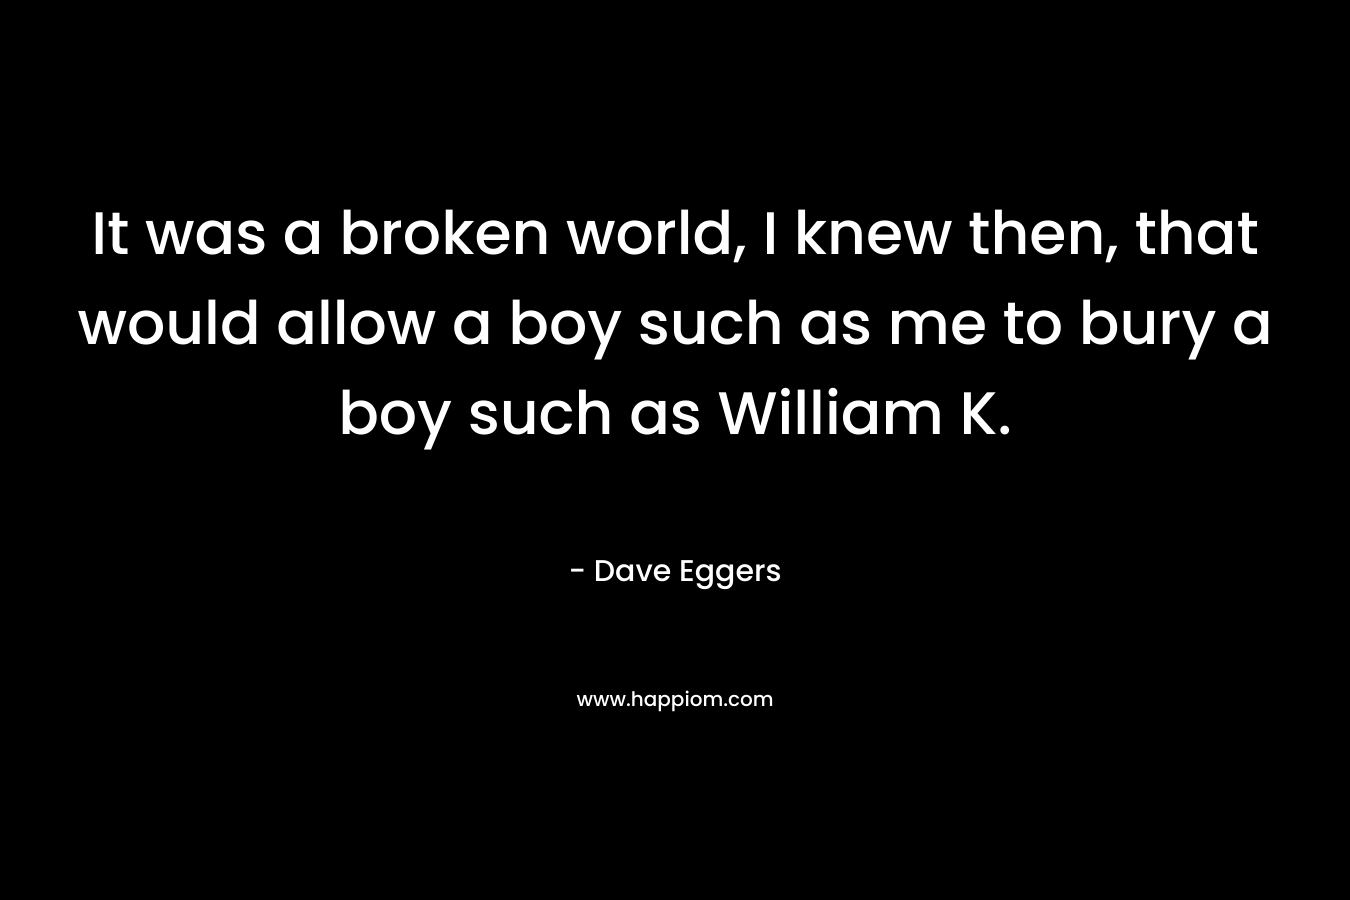 It was a broken world, I knew then, that would allow a boy such as me to bury a boy such as William K.